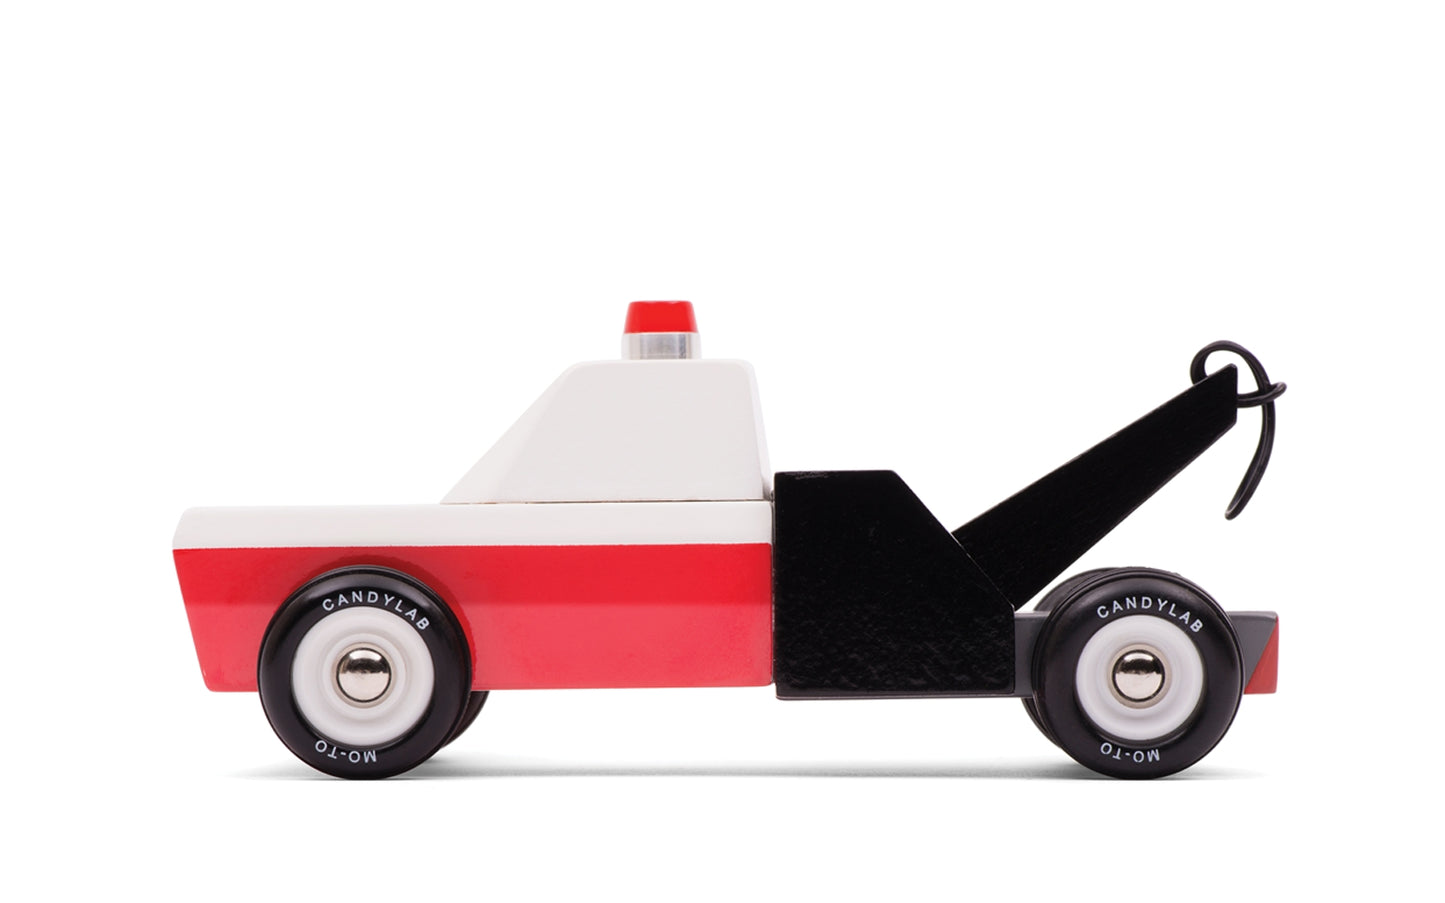 Toy Tow Truck by Candylab Toys features solid beech wood, water-based paints, and ABS plastic wheels. Made sustainably, made to last, made for fun.